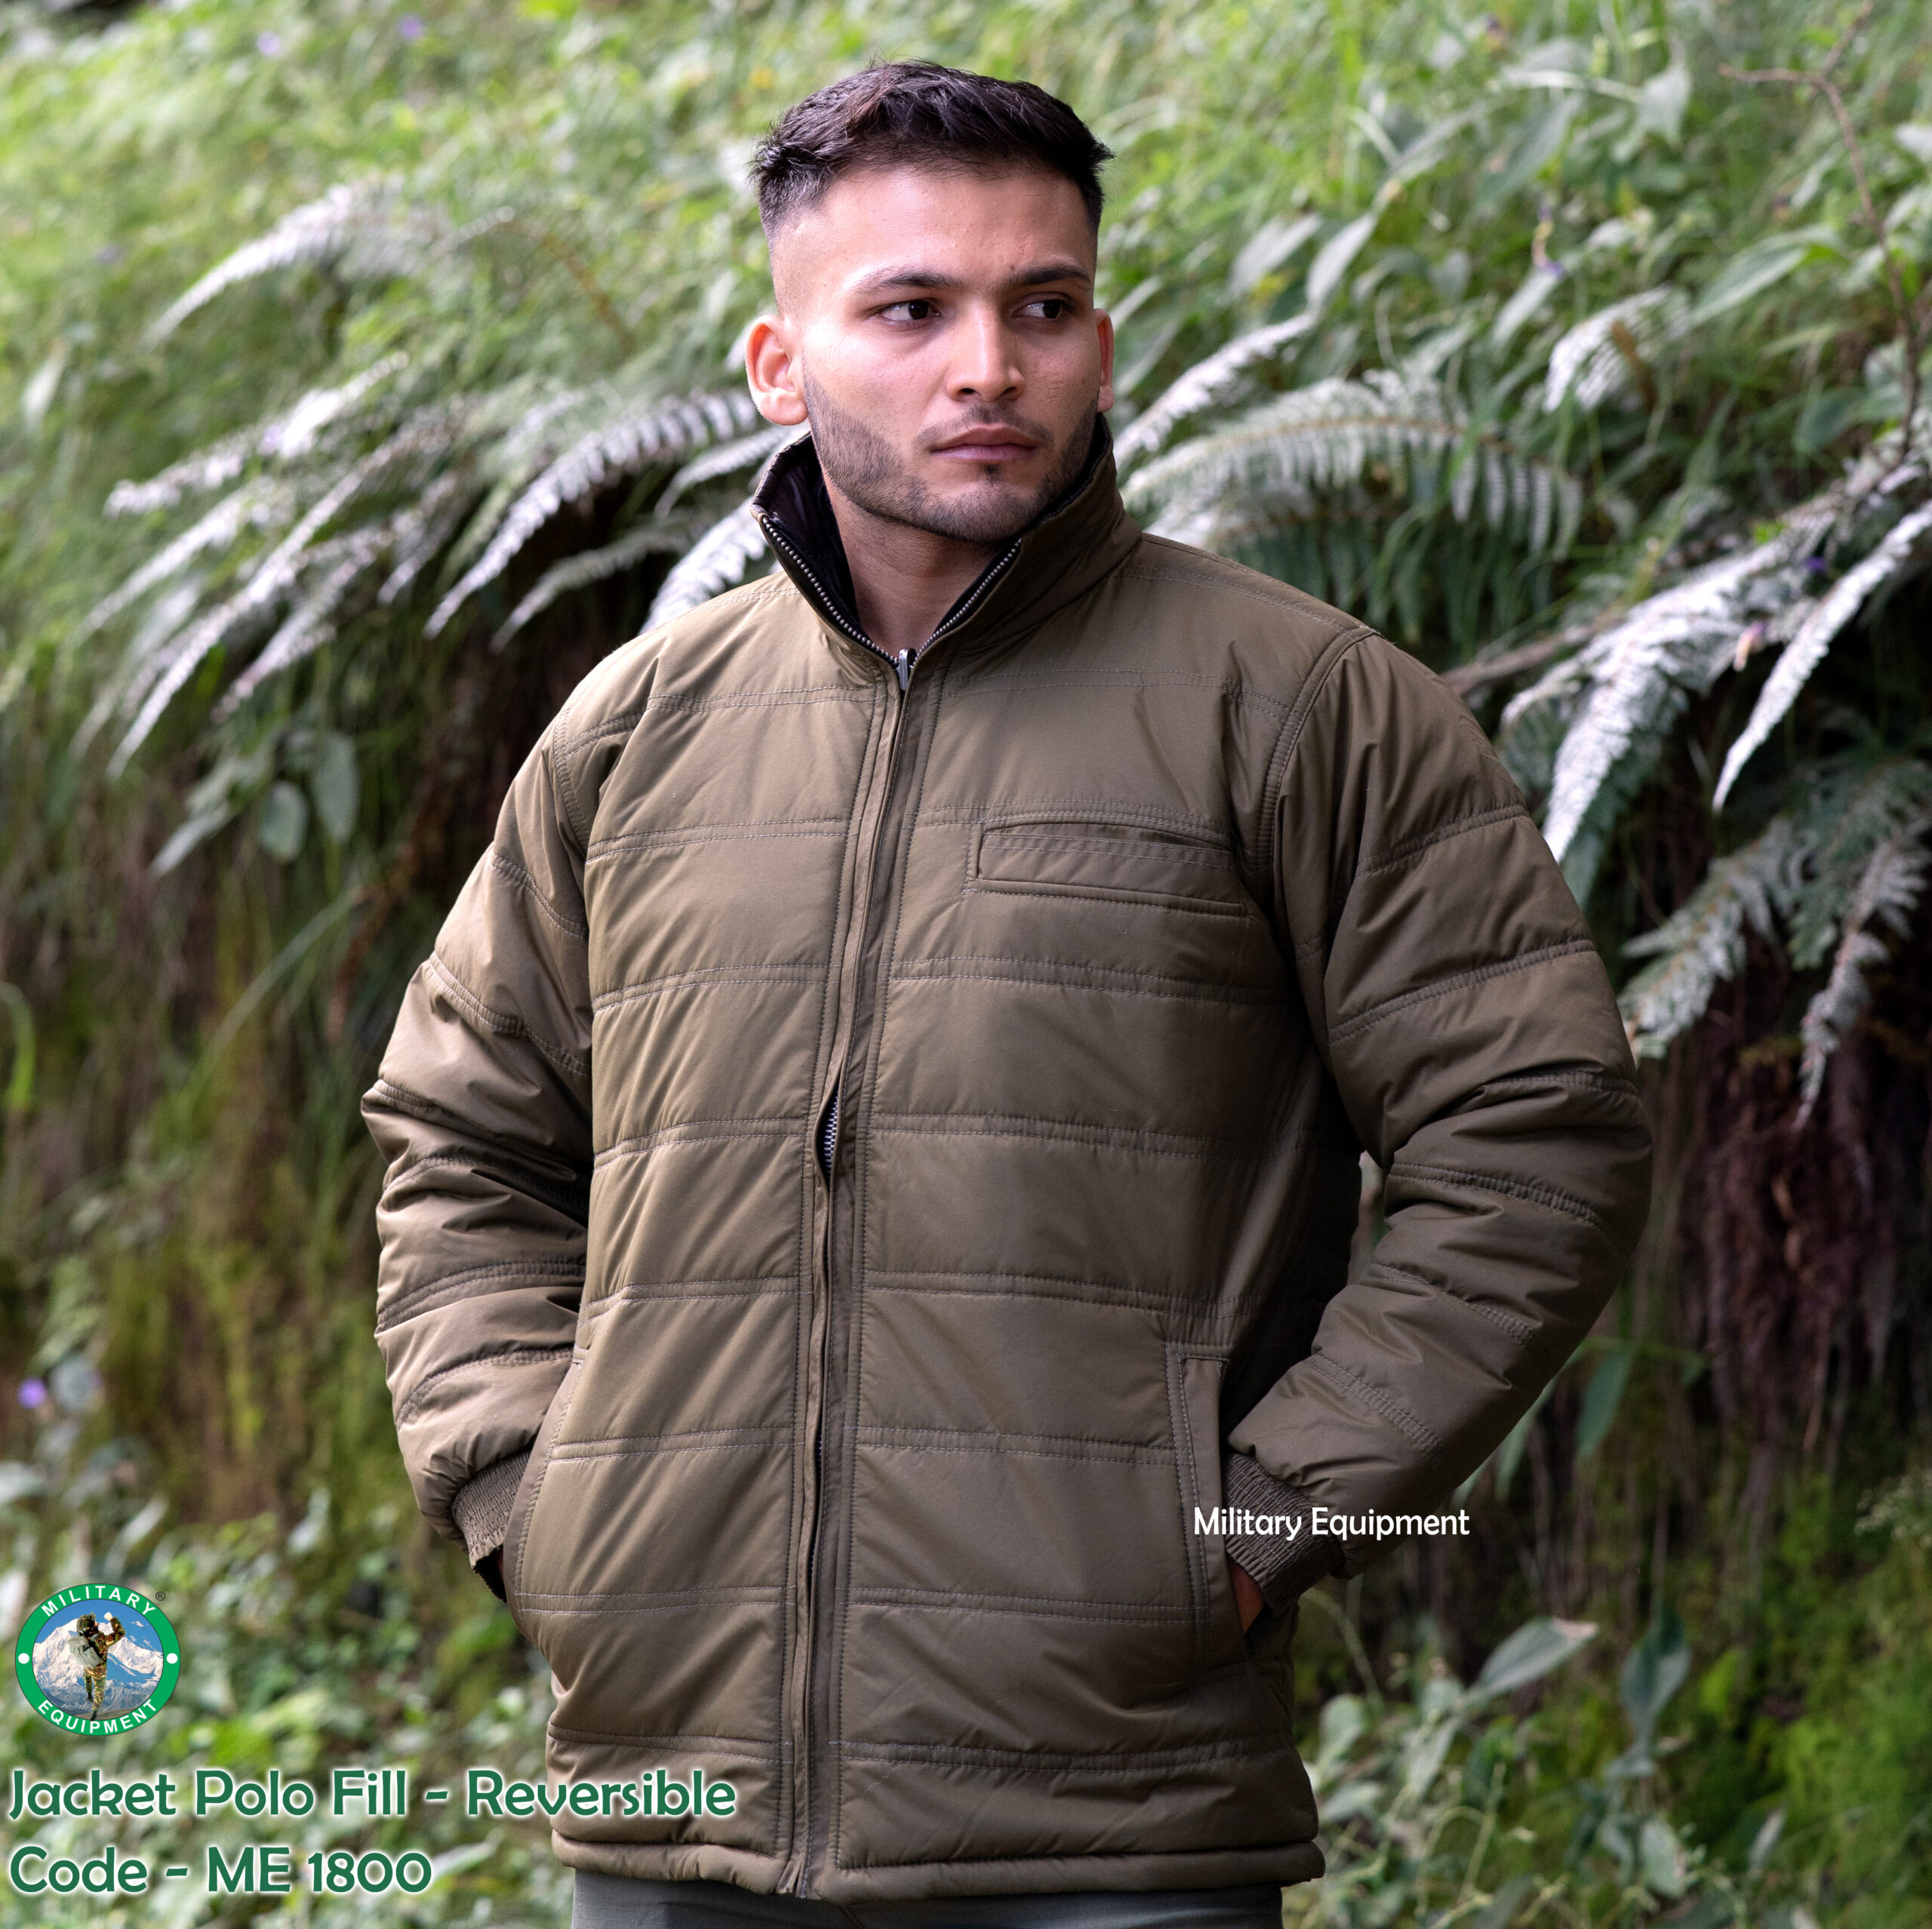 Jacket Polo Fill Reversible - Military Equipment